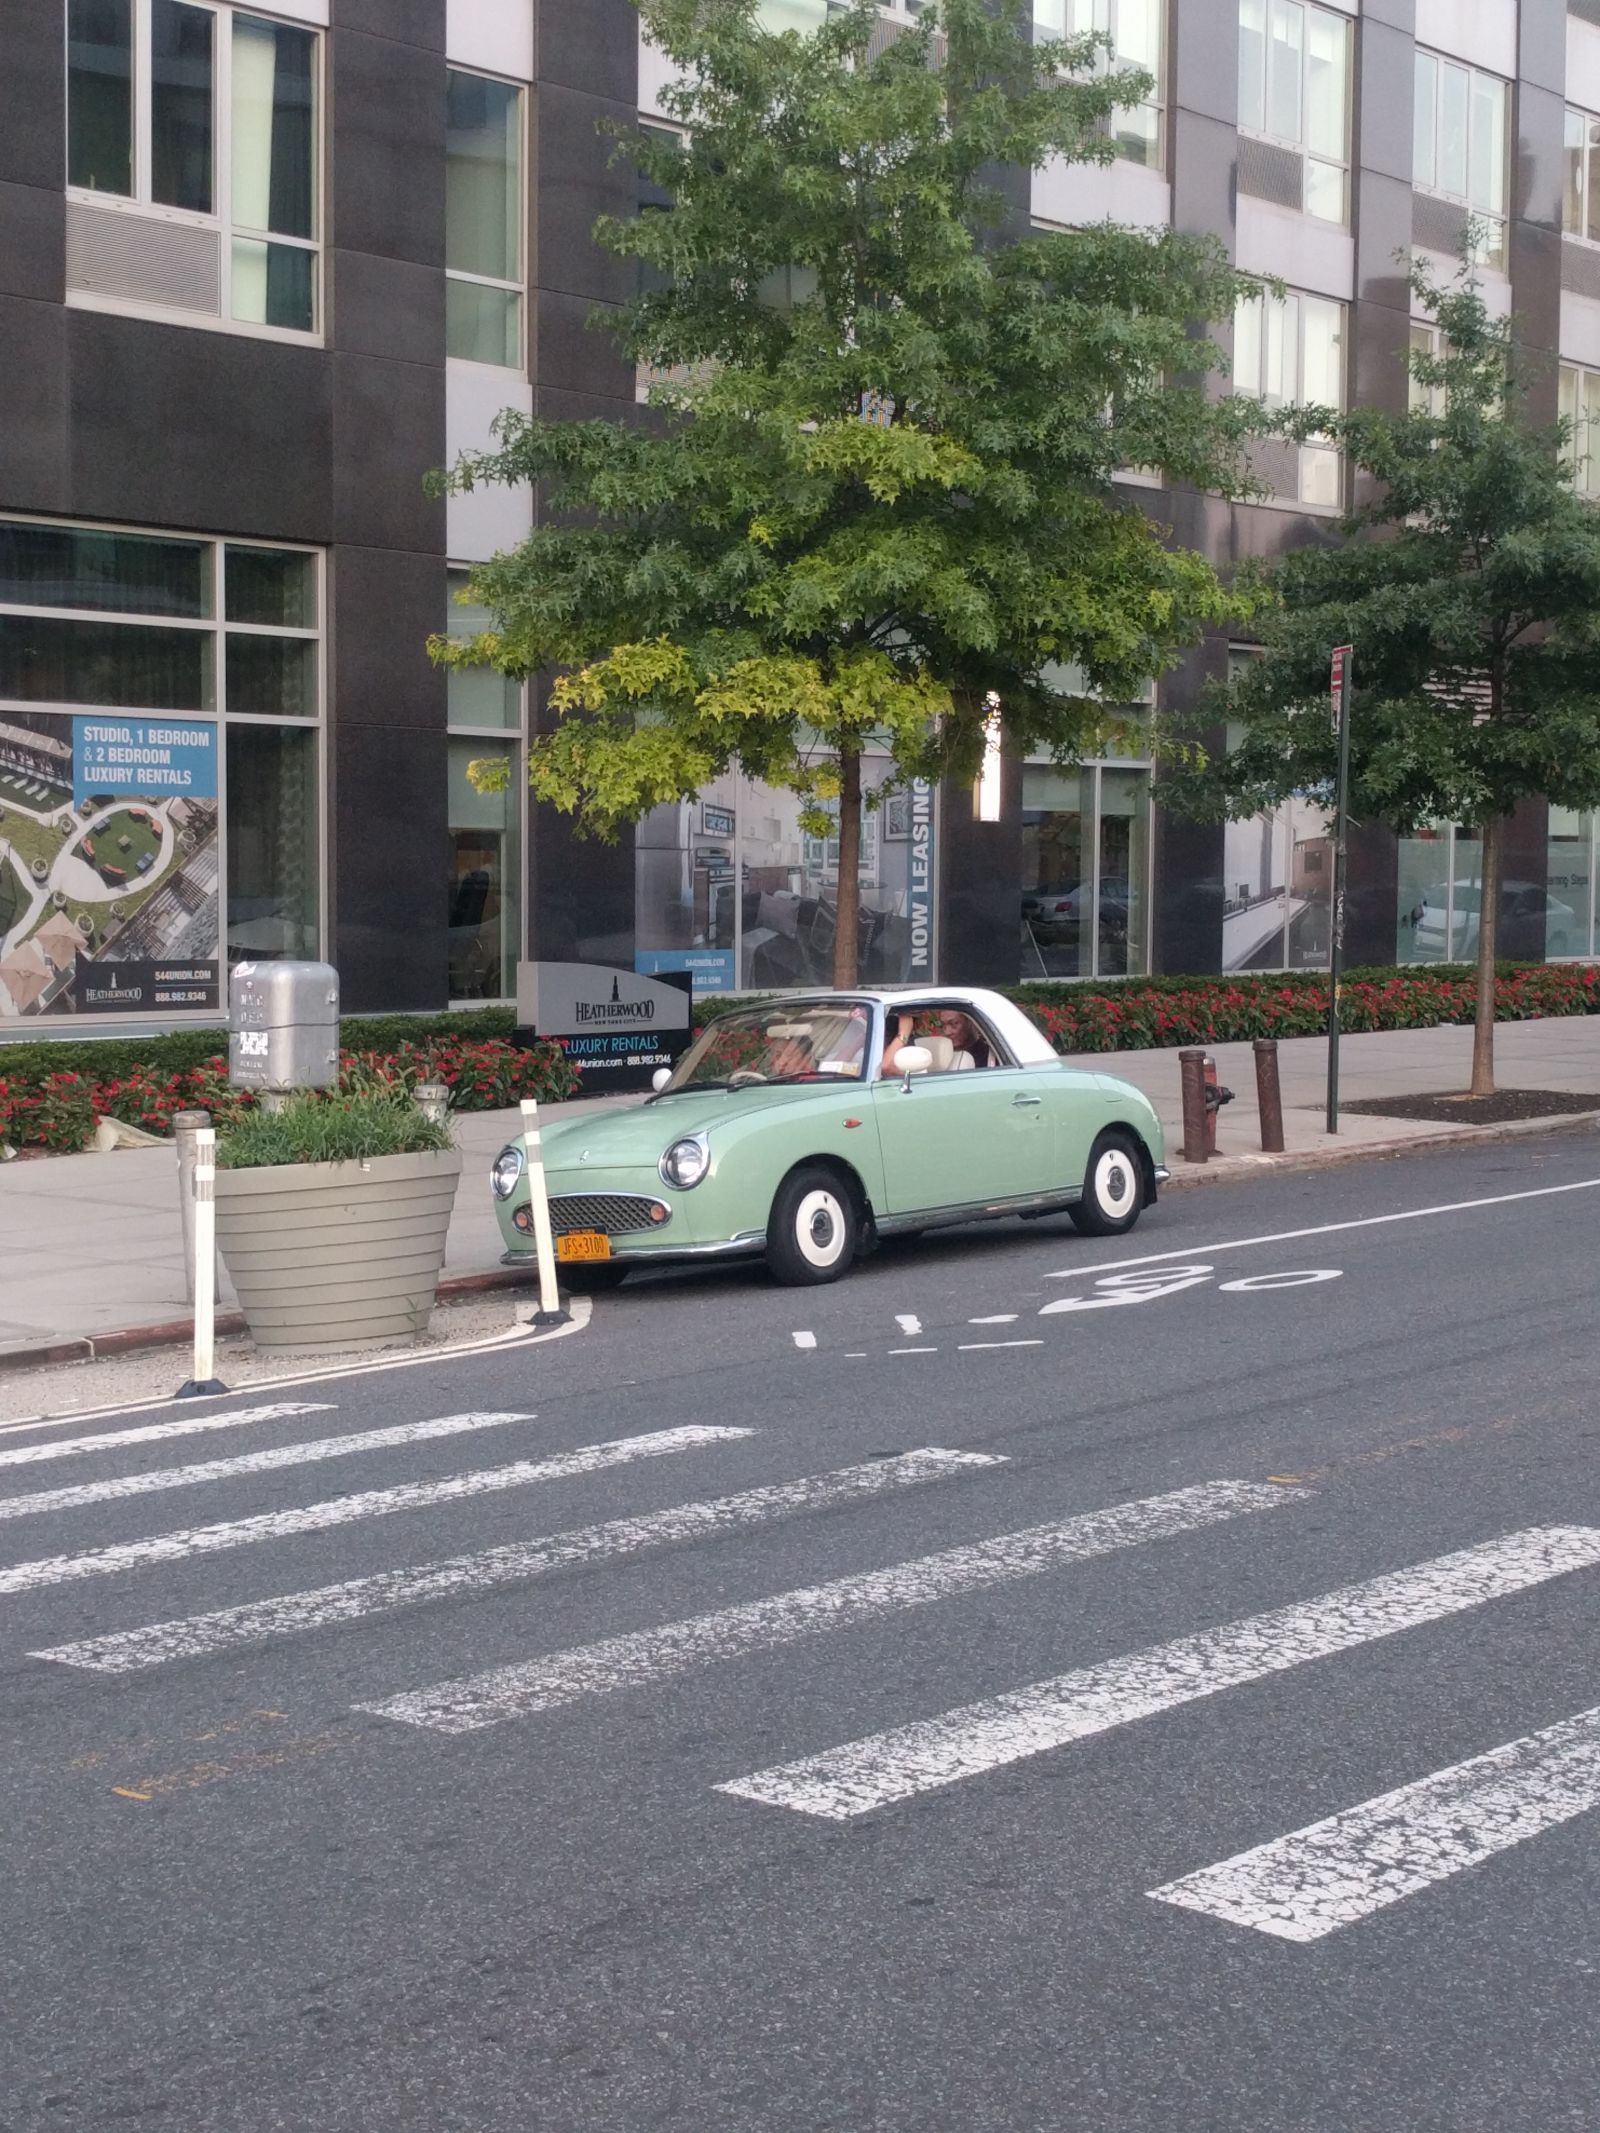 Illustration for article titled Spotted in Brooklyn: a Nissan Figaro!